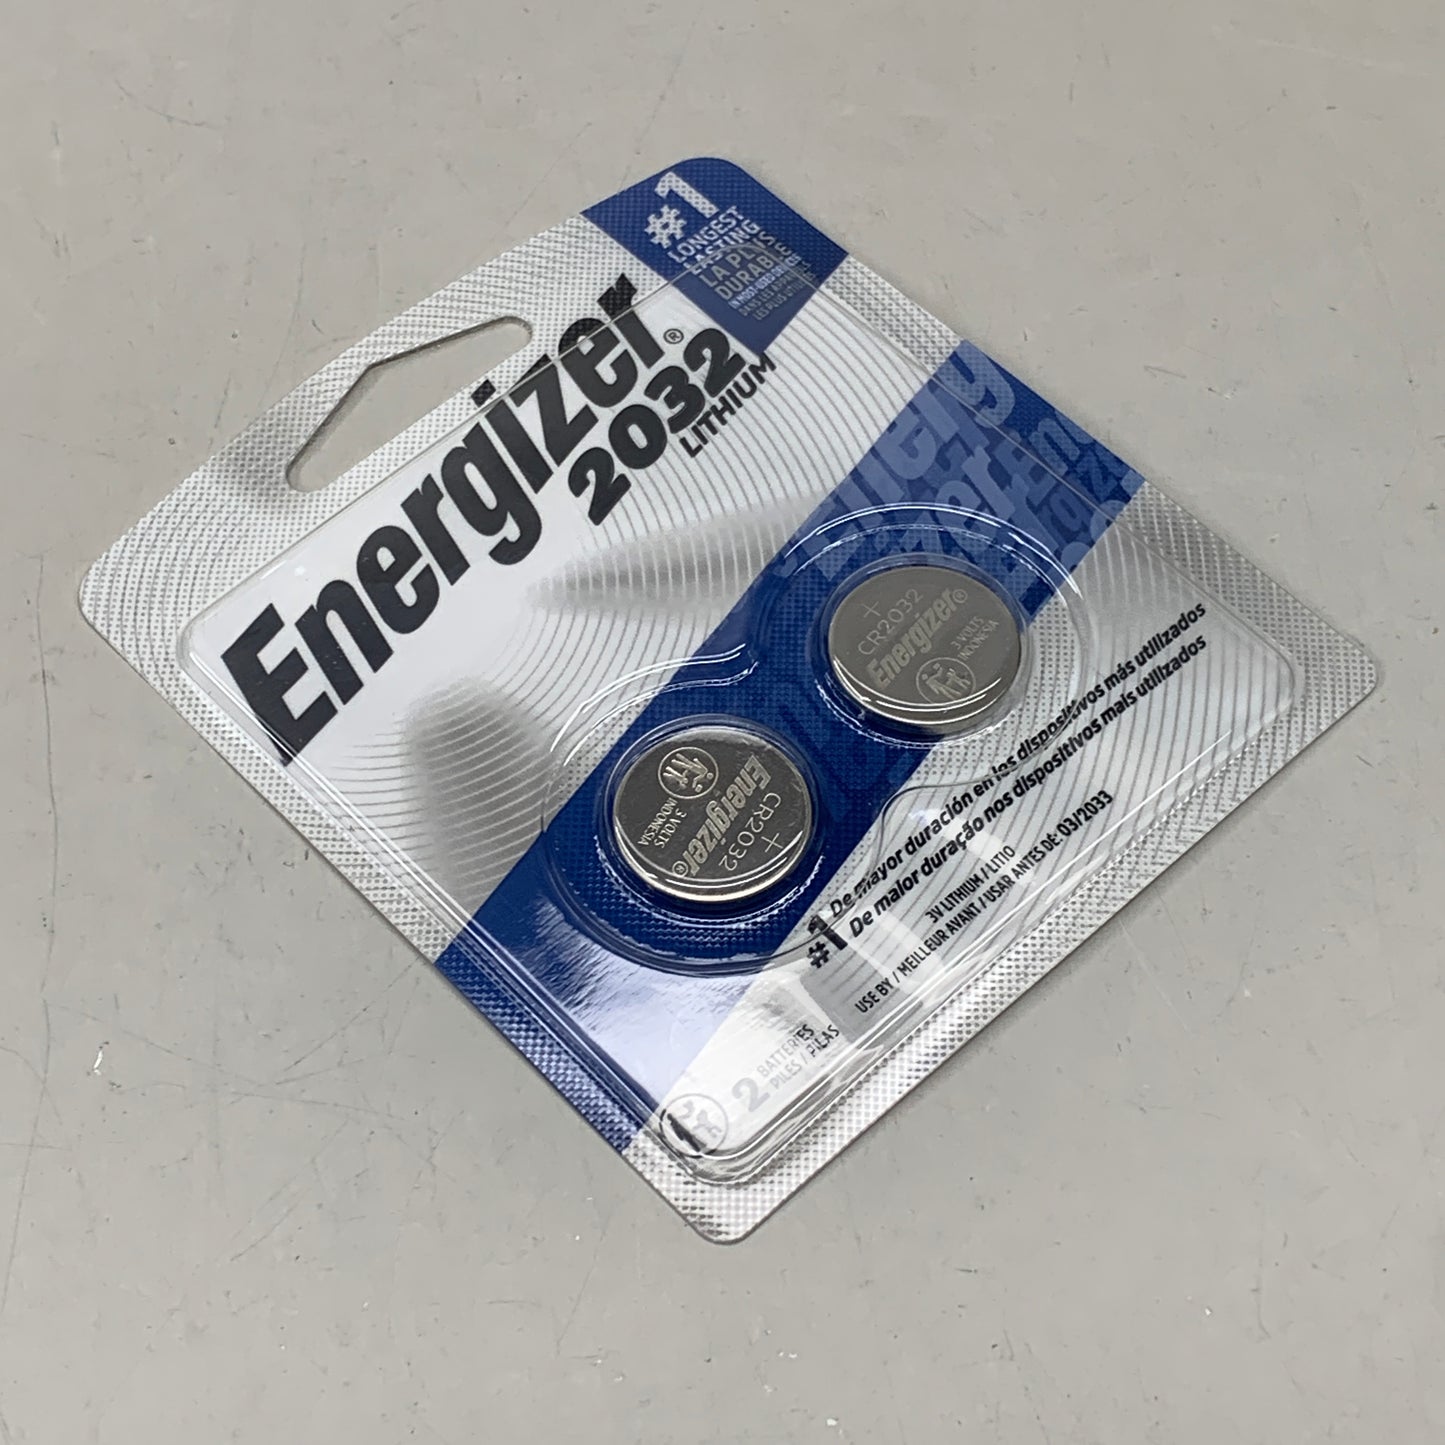 ENERGIZER (6 TOTAL BATTERIES) 2032 Lithium Coin Battery for Key FOB